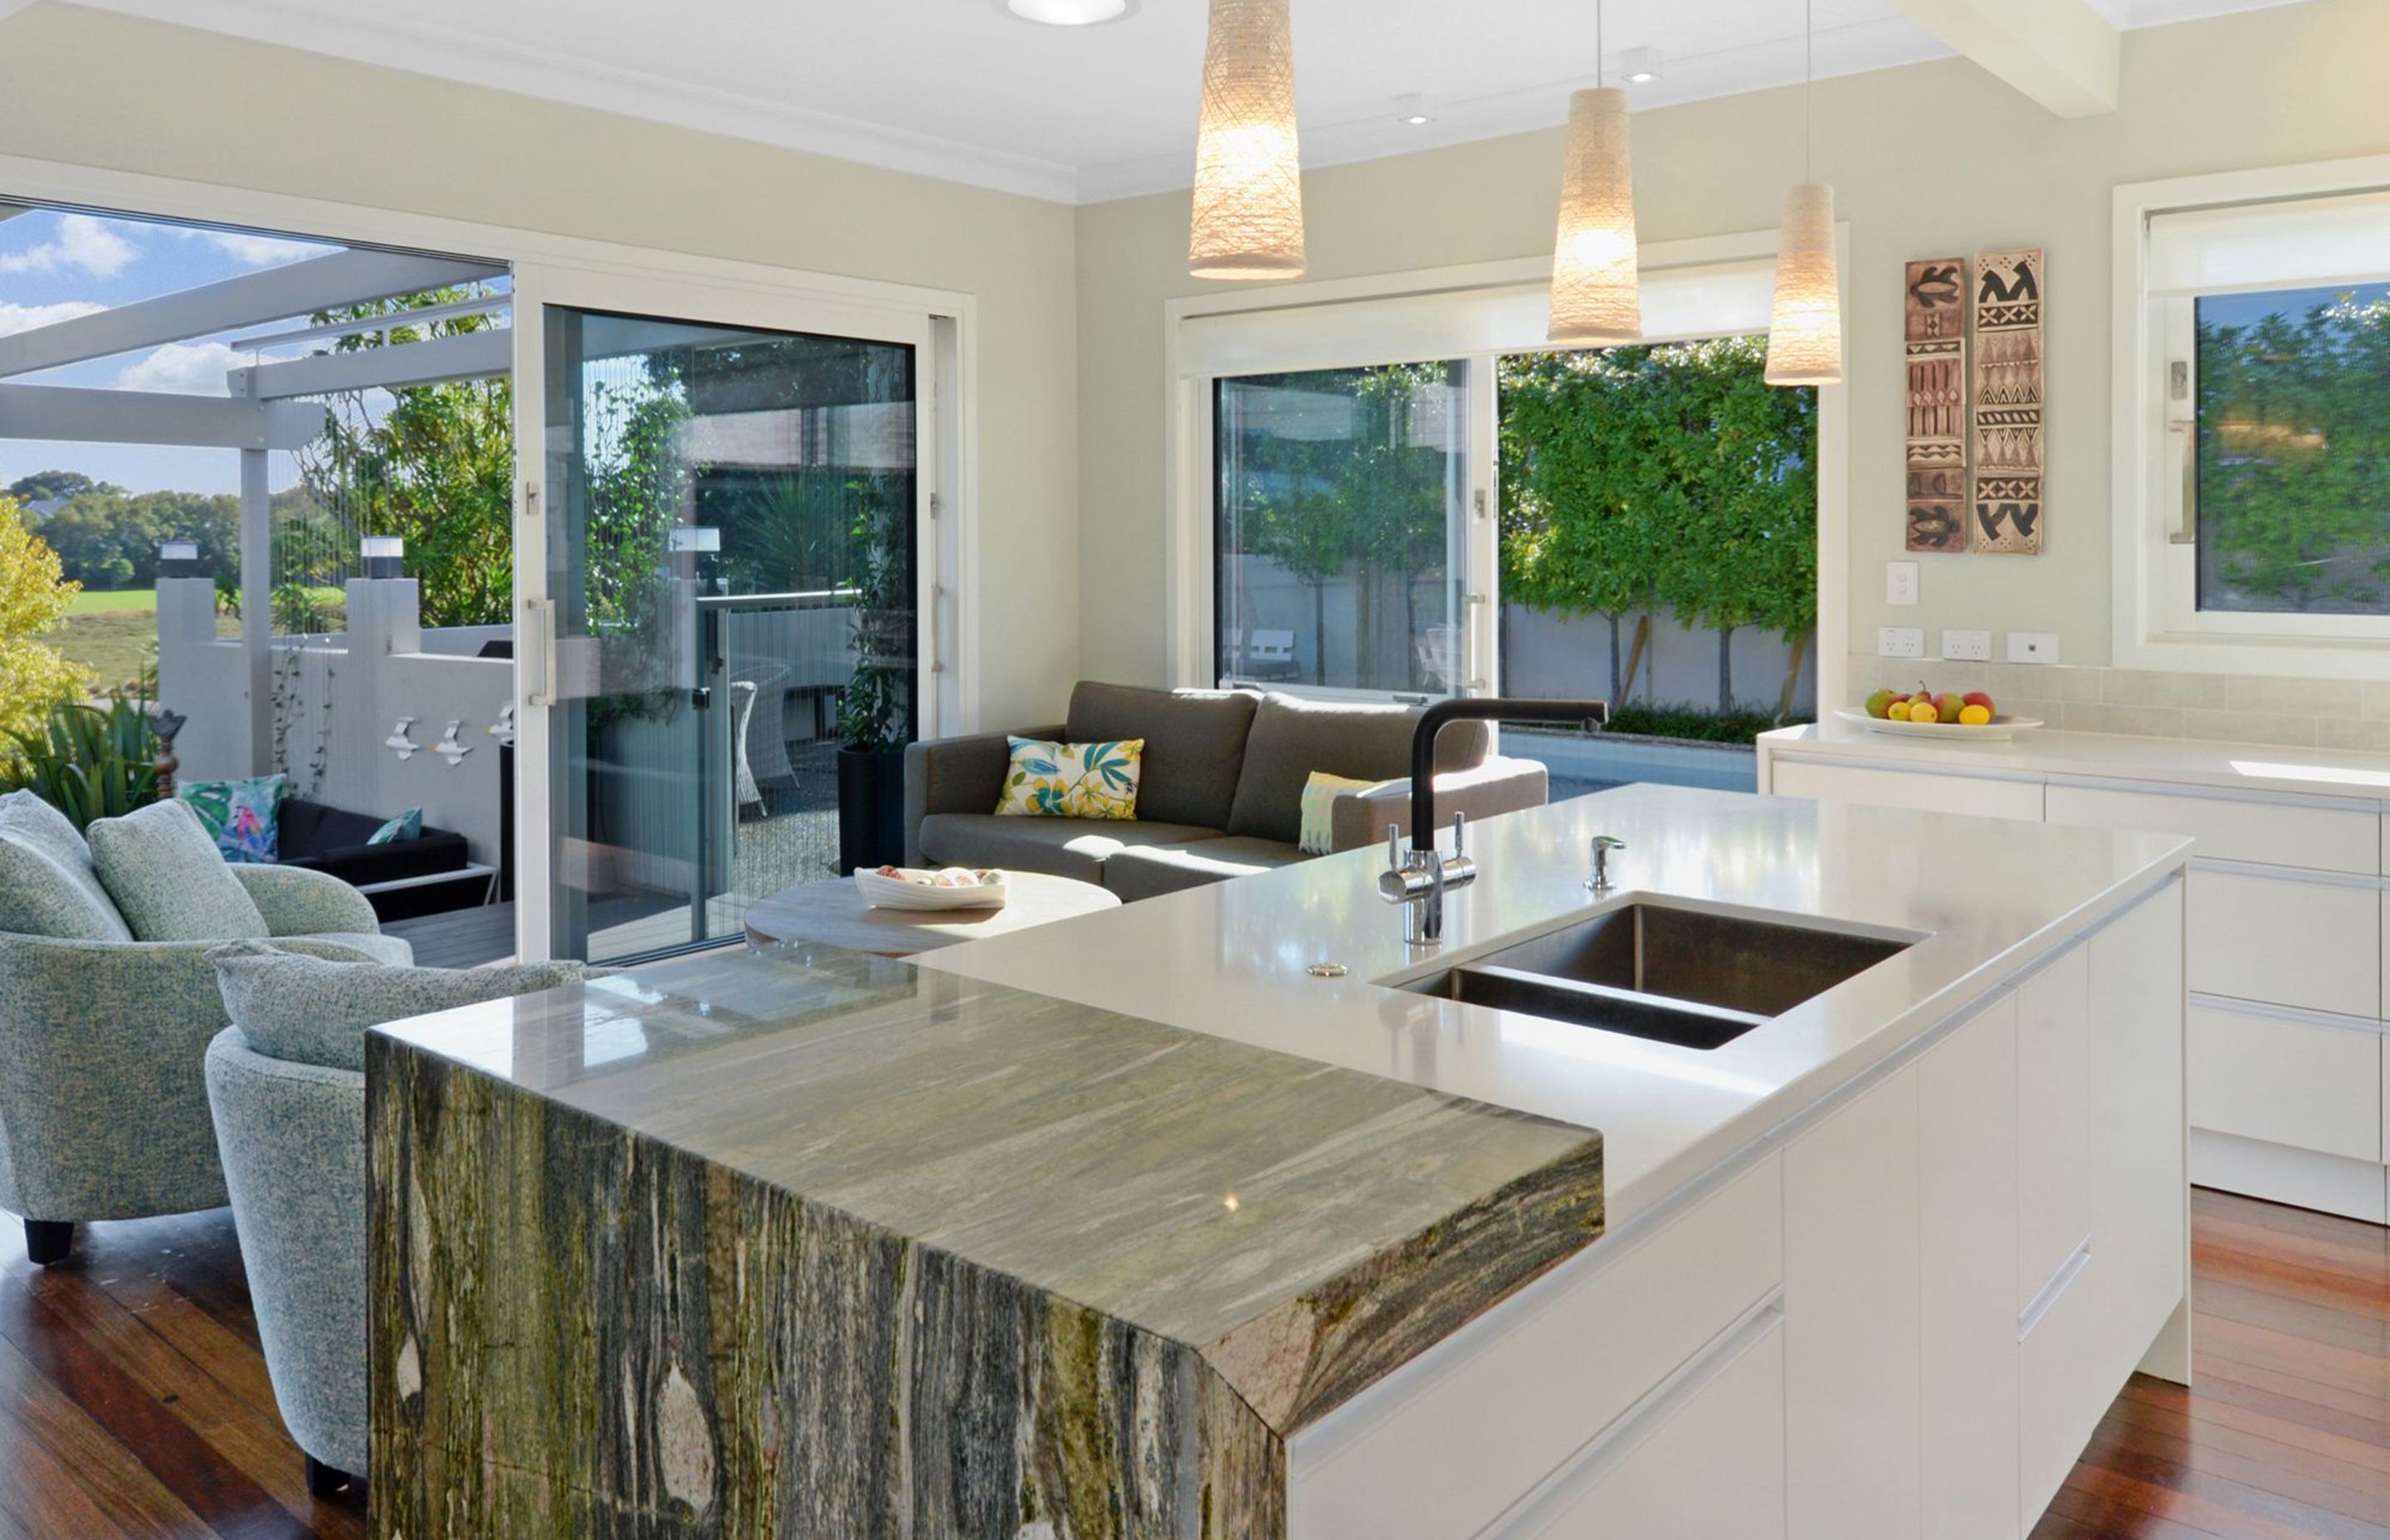 A stunning granite feature benchtop creates a focal point.